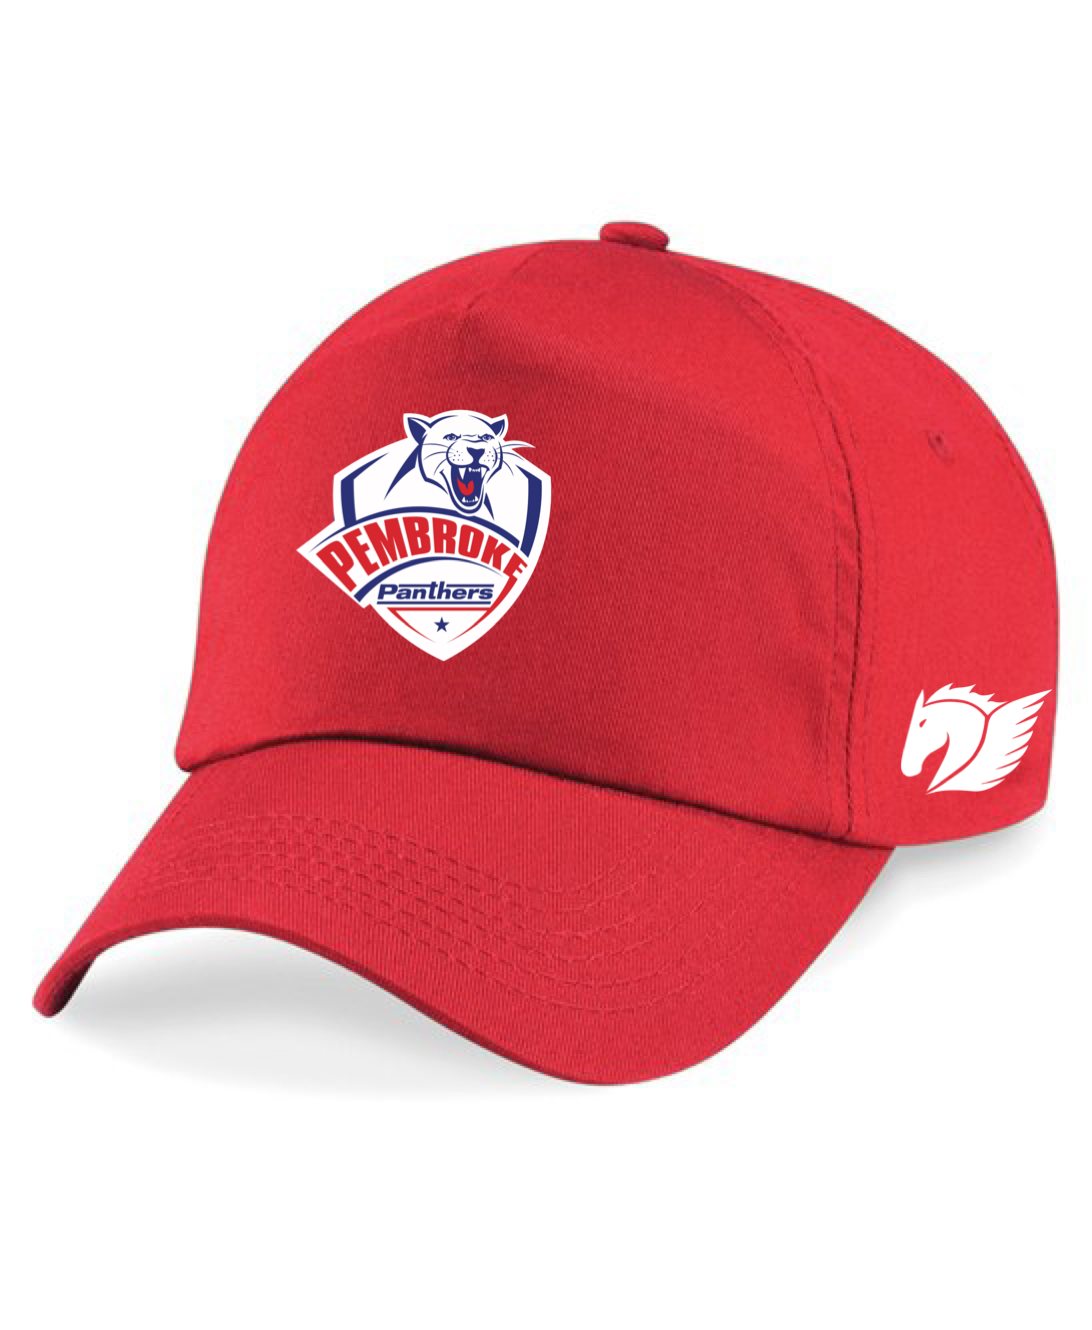 Pembroke Panthers Supporters Cap